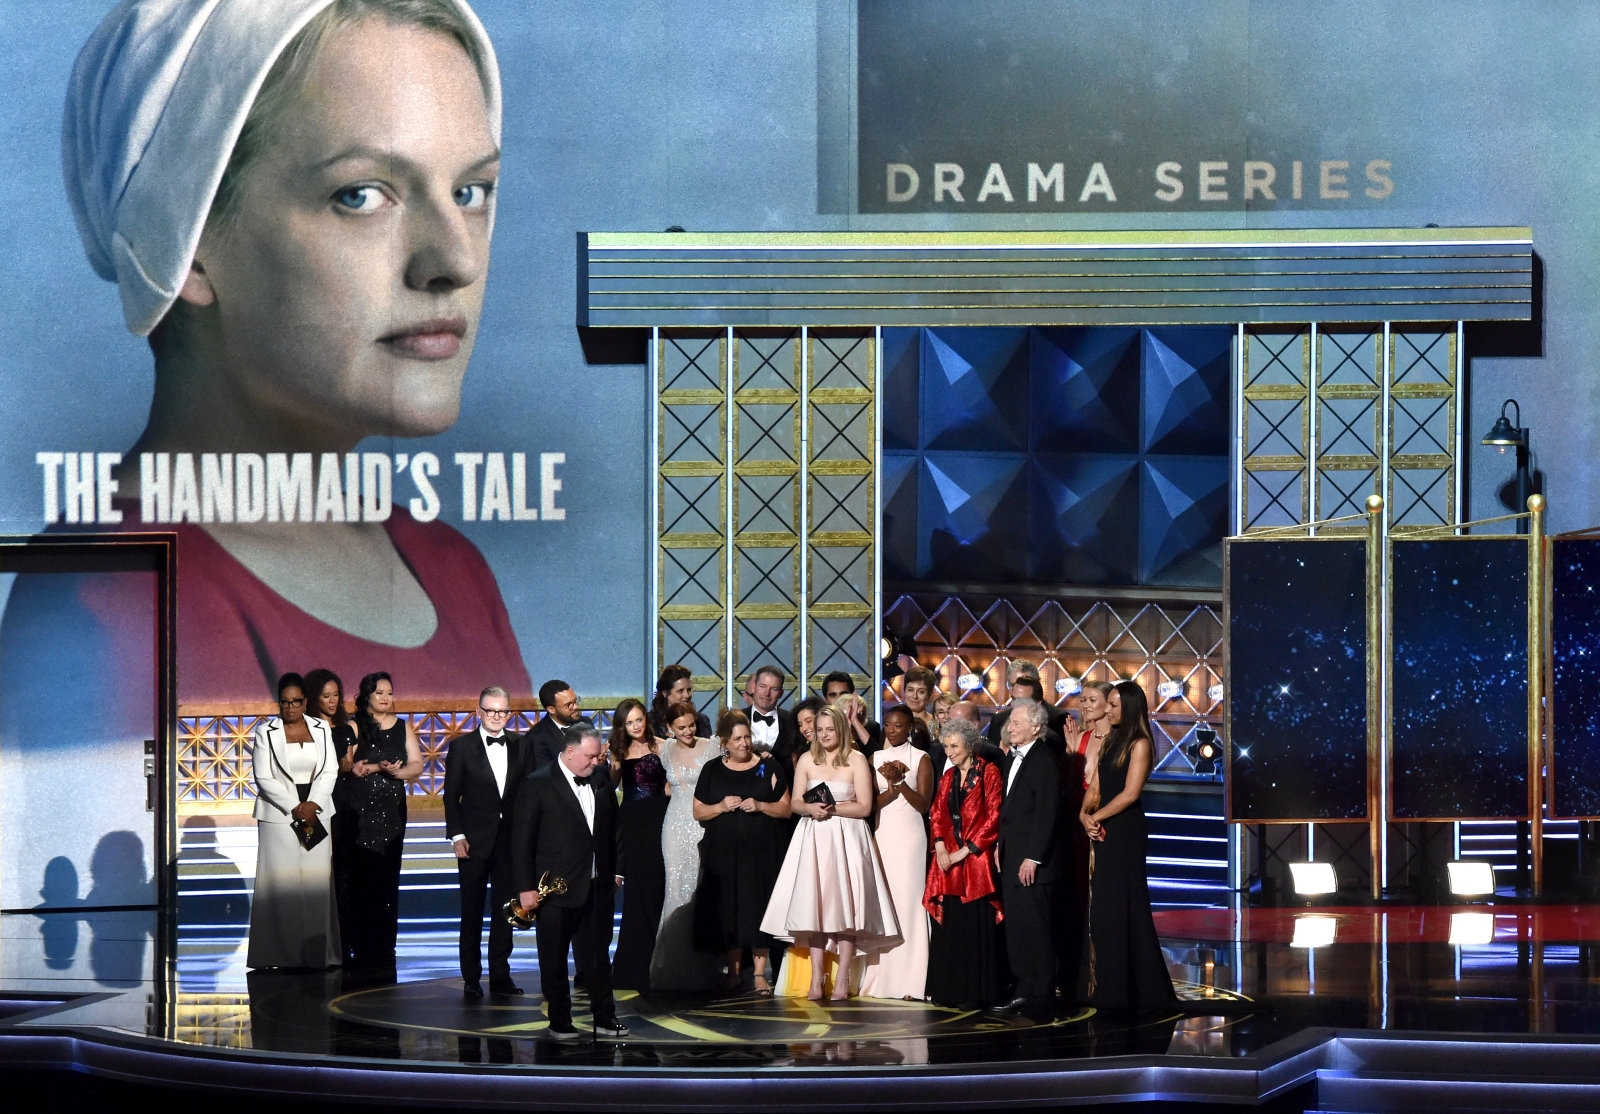 'The Handmaid's Tale' wins big for Hulu at the Emmy Awards | DeviceDaily.com